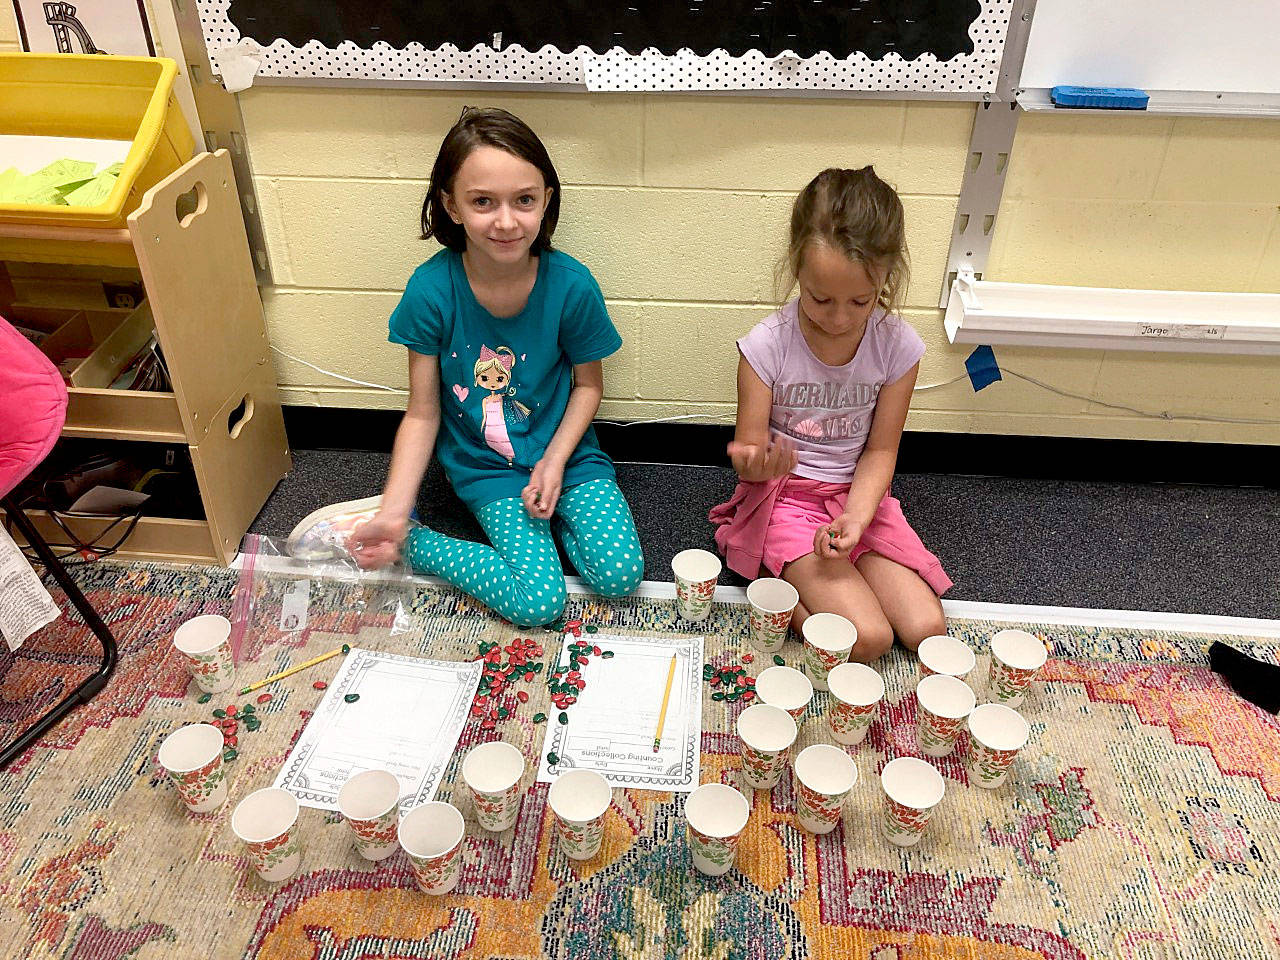 Elyssa Cunningham and Ellie Roedell, both second-graders in Doreen Minard’s class at Helen Haller Elementary School, use a math routine called “Counting Collections” as an introduction to learning about place value. Submitted photo